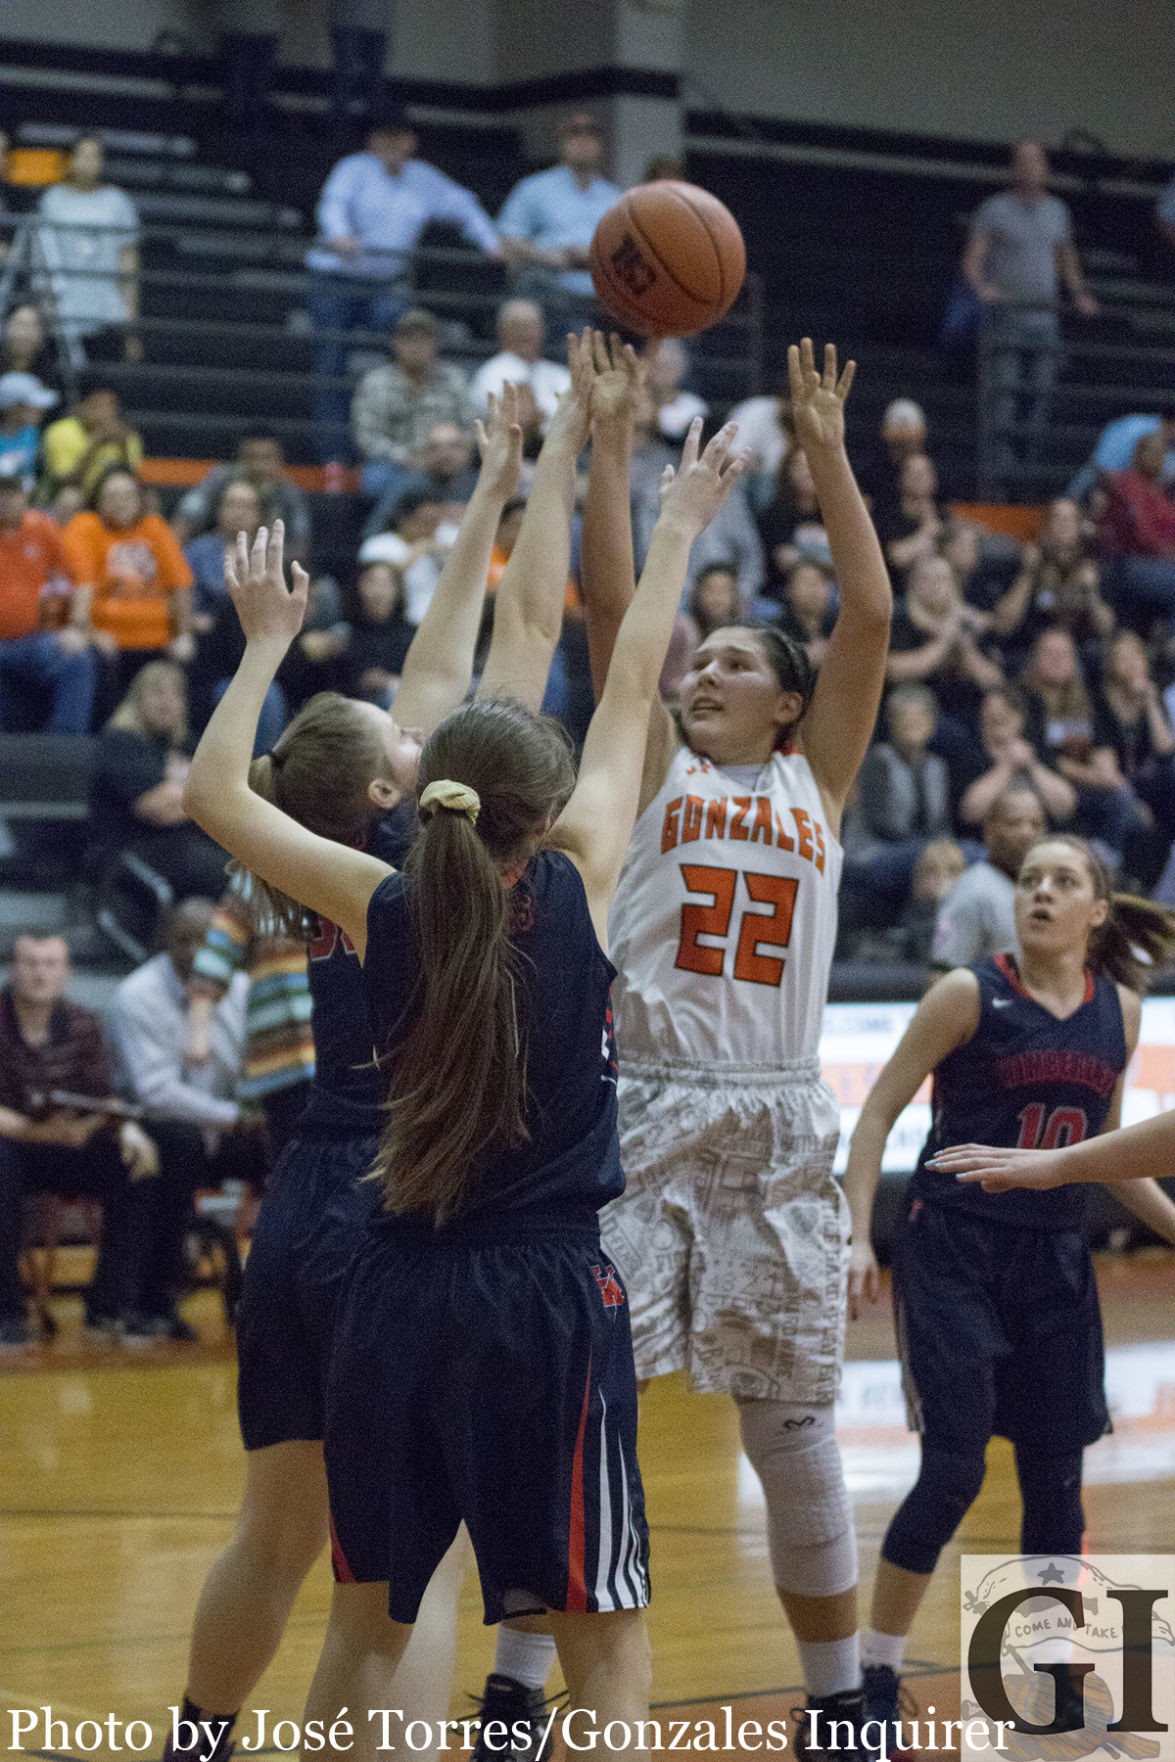 The Lady Apaches attacked the post game as senior Amanda Dixson (22) puts up a shot during Gonzales' 70-53 win over Wimberley. Dixson ended the night with eight points, four rebounds and an assist.